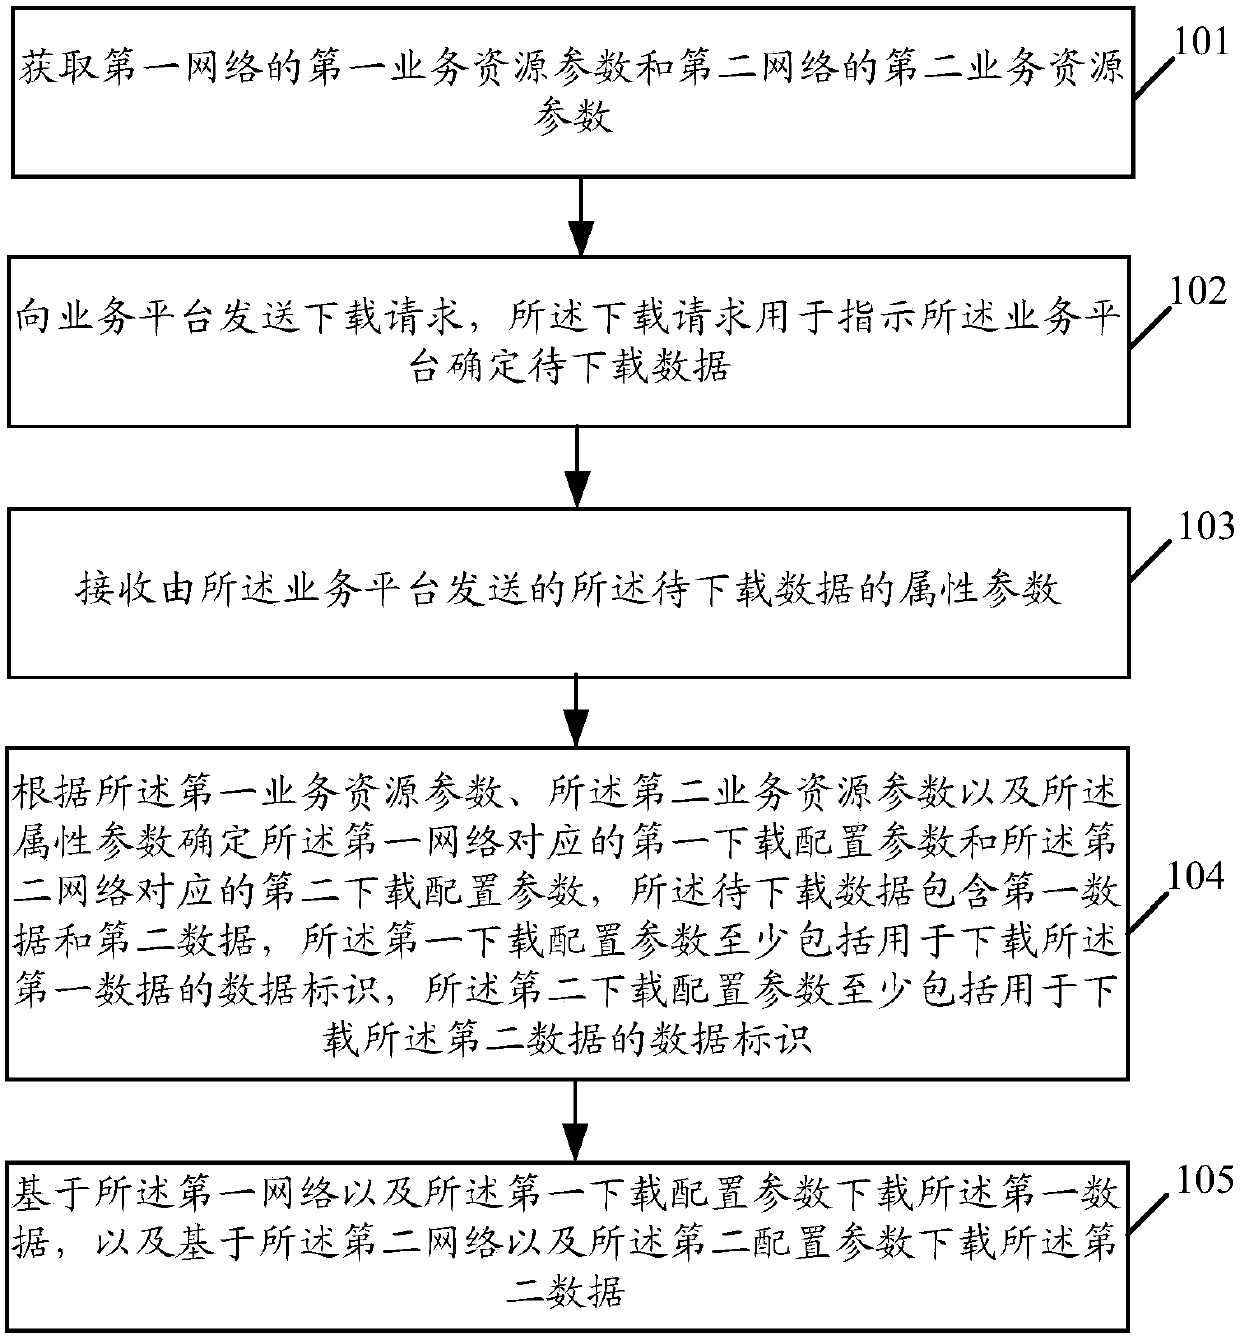 Resource allocation method and related product